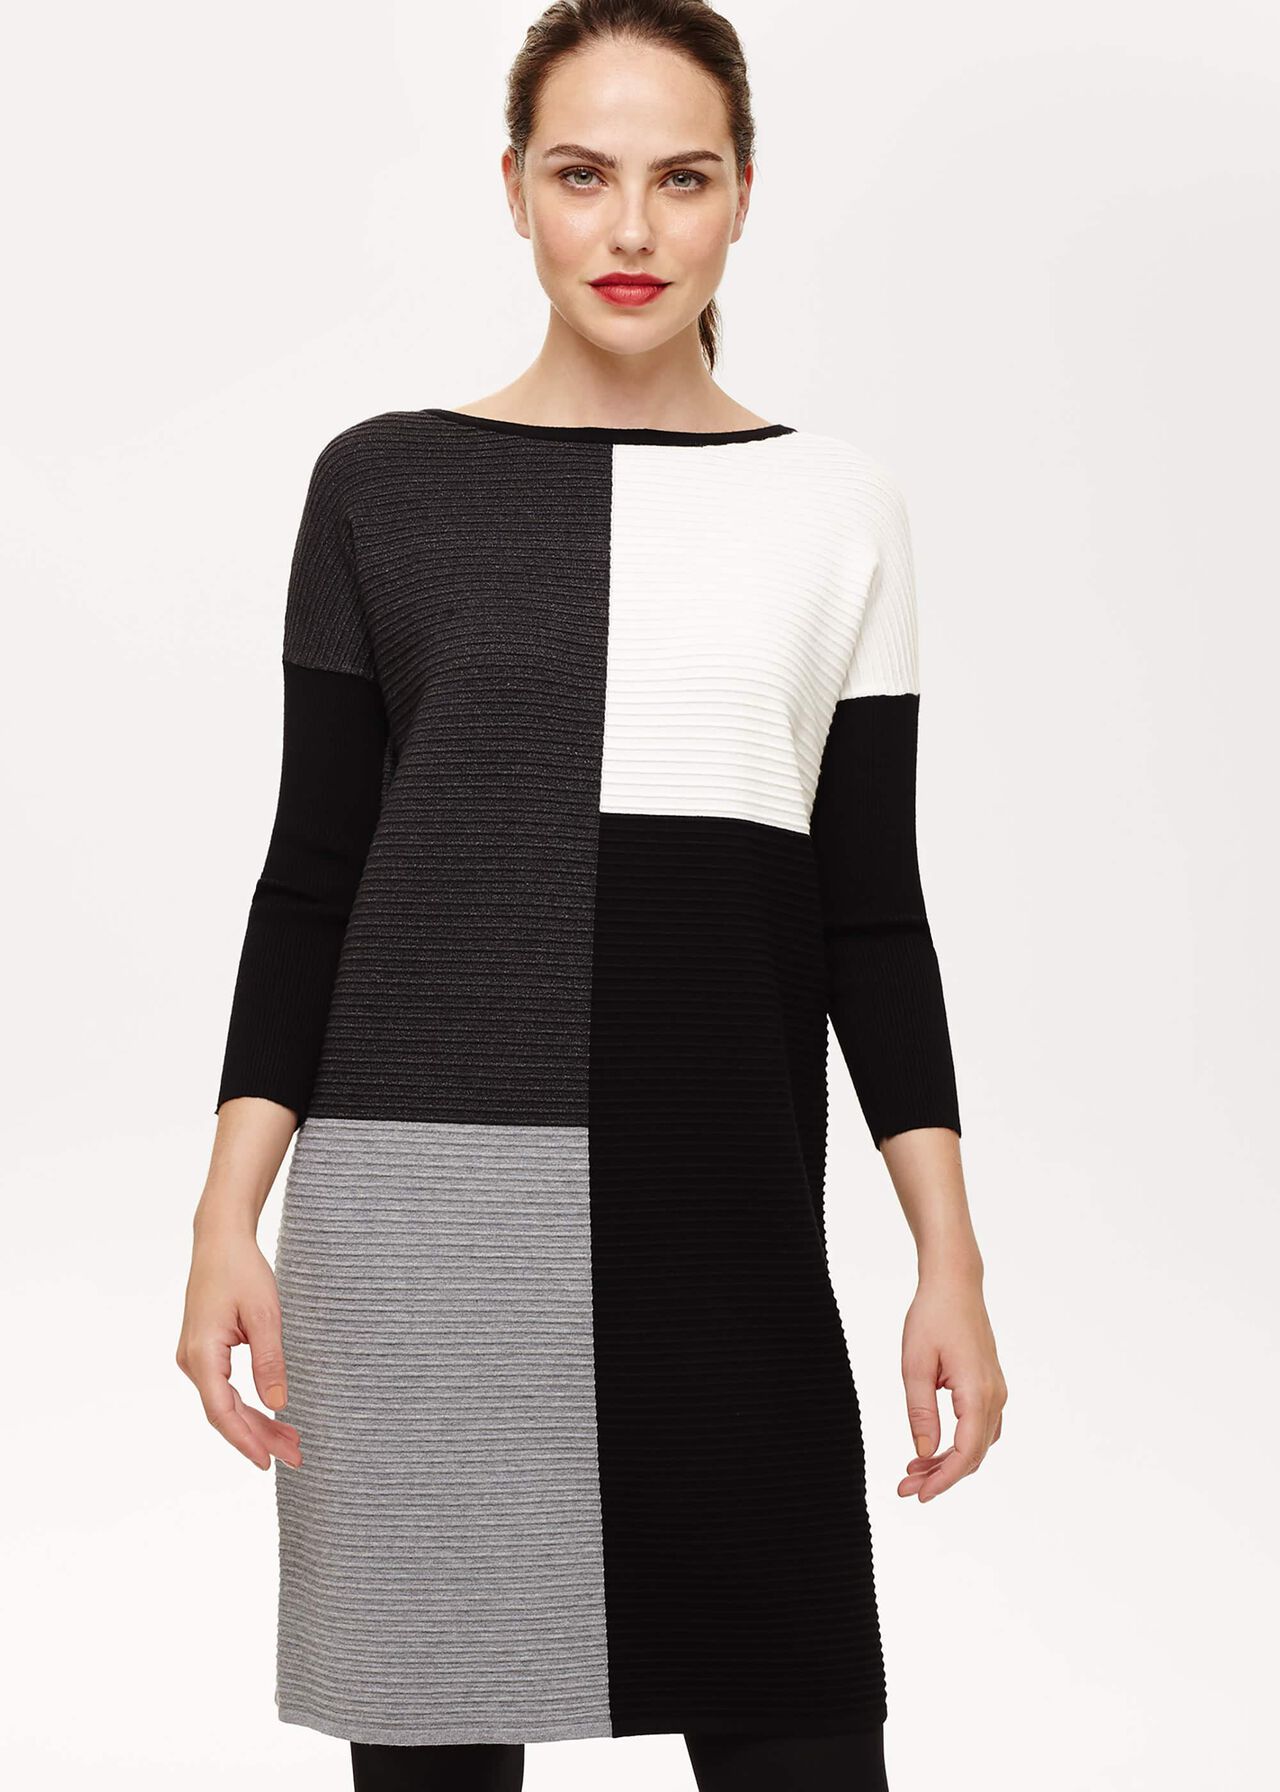 Cher Colour Block Knitted Dress | Phase Eight